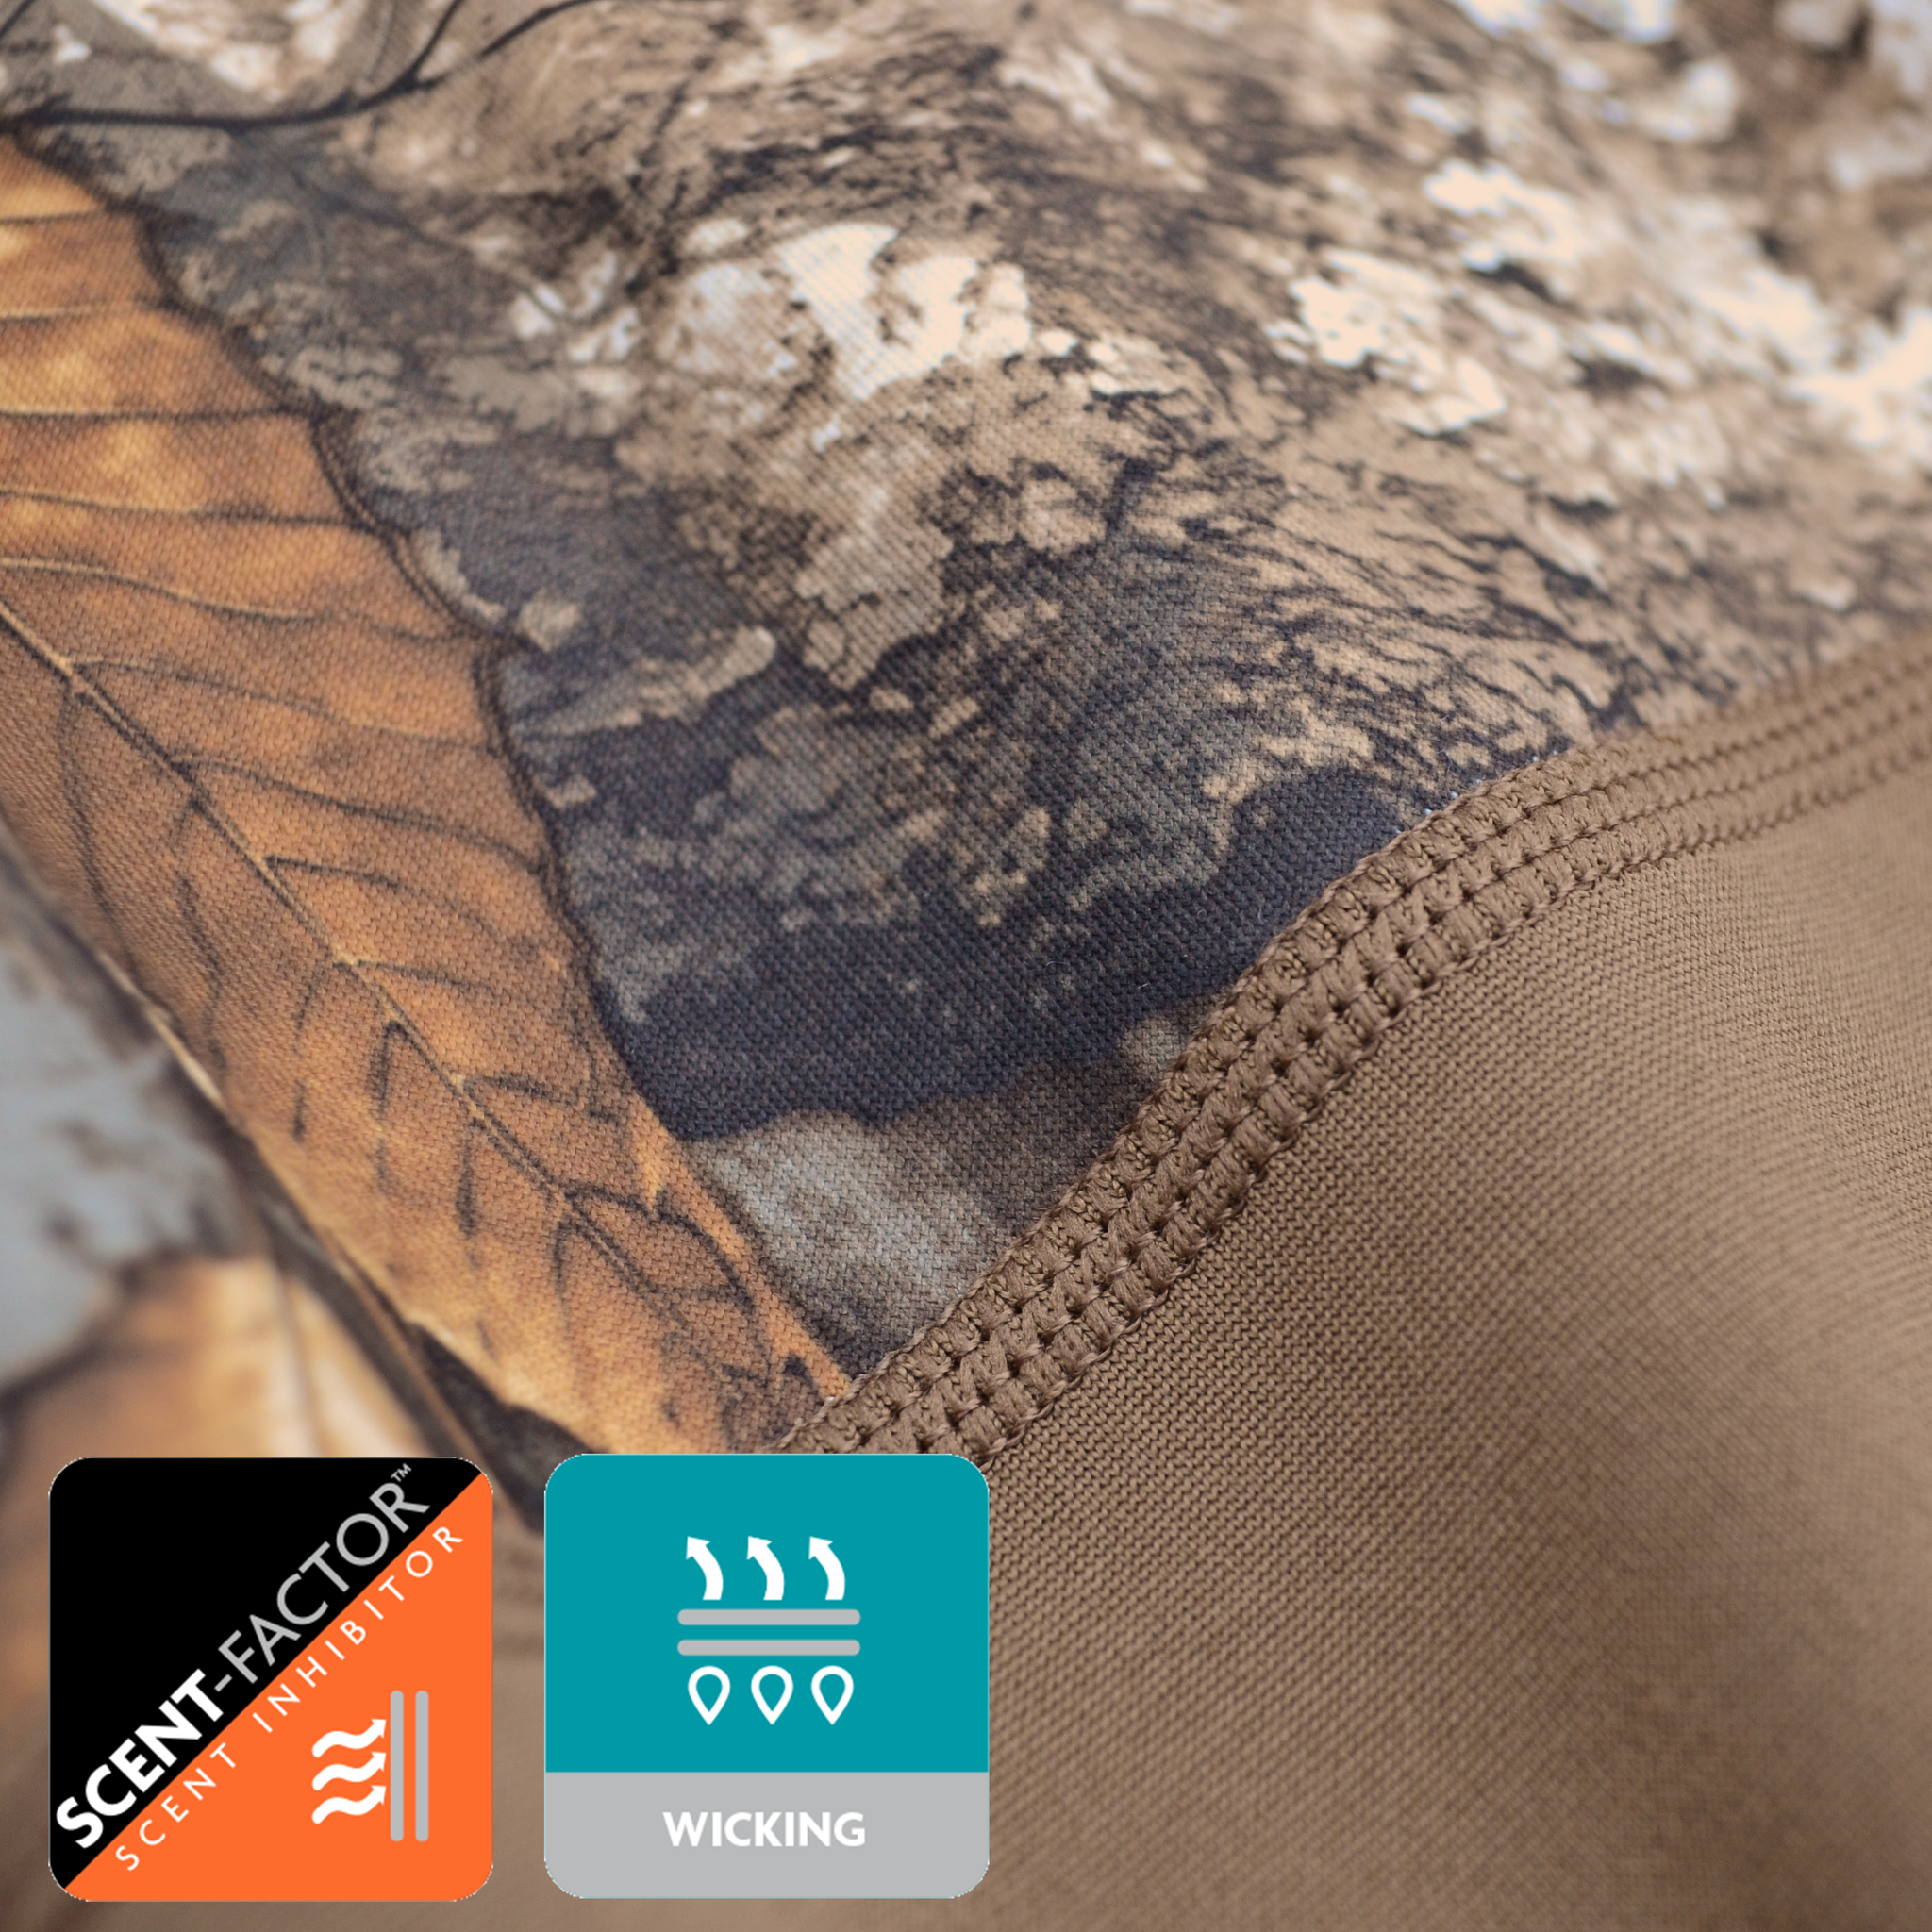 Men's Buck Hill Base Layer Bottom Outside fabric with Scent-Factor and Moisture Wicking Logos